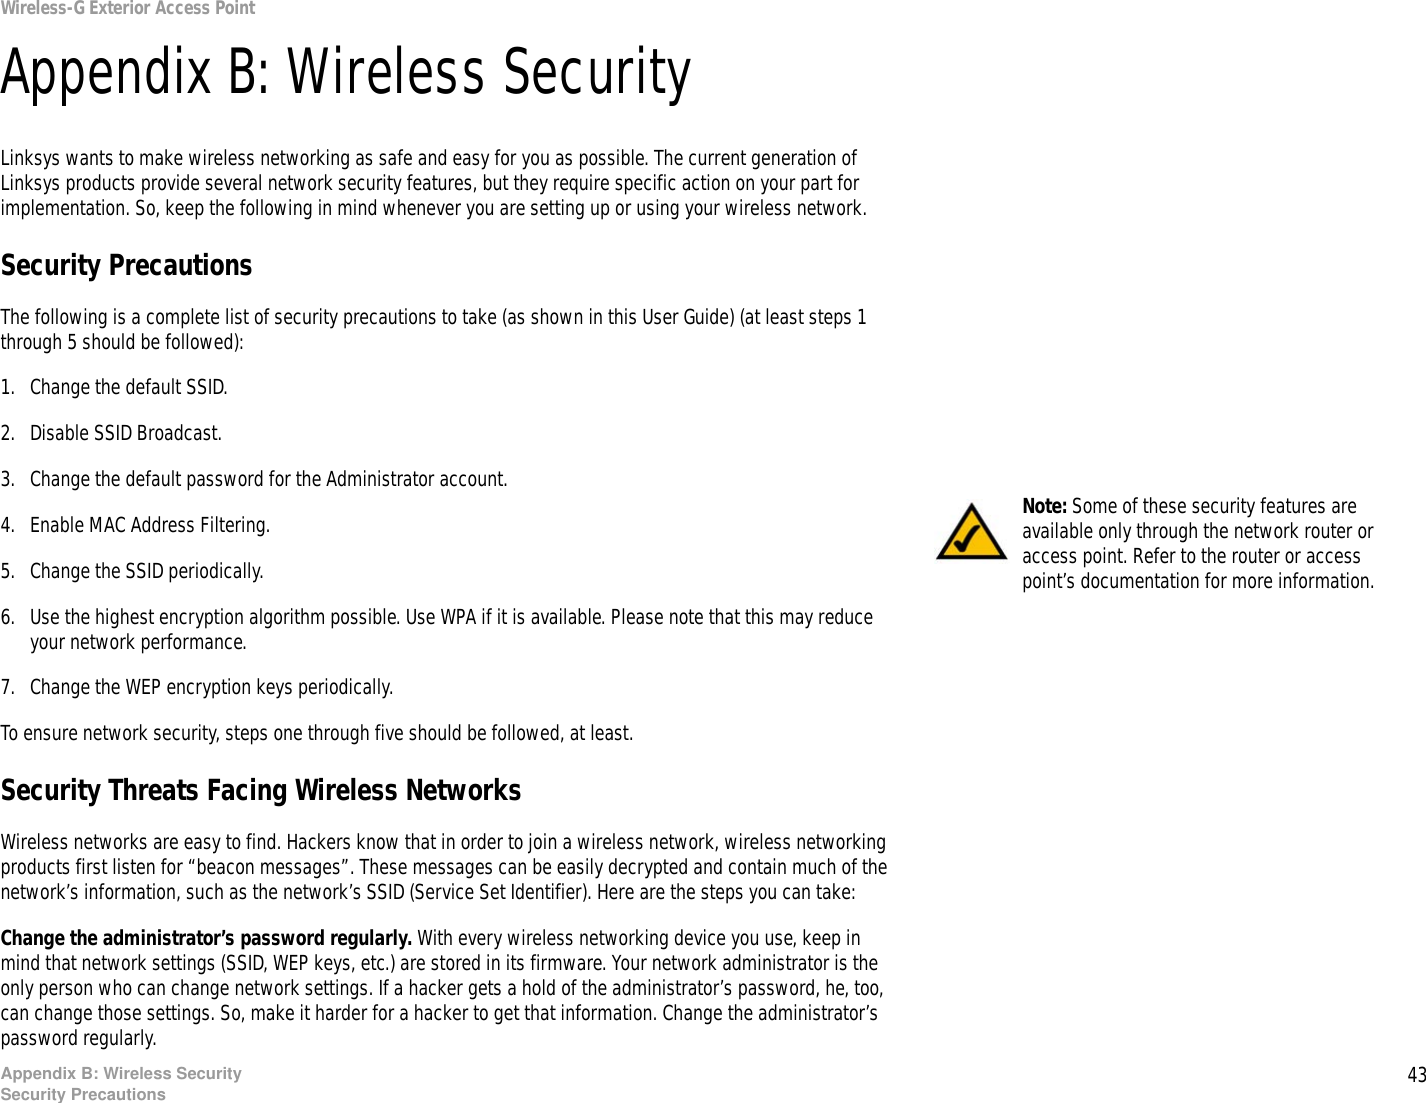 43Appendix B: Wireless SecuritySecurity PrecautionsWireless-G Exterior Access PointAppendix B: Wireless SecurityLinksys wants to make wireless networking as safe and easy for you as possible. The current generation of Linksys products provide several network security features, but they require specific action on your part for implementation. So, keep the following in mind whenever you are setting up or using your wireless network.Security PrecautionsThe following is a complete list of security precautions to take (as shown in this User Guide) (at least steps 1 through 5 should be followed):1. Change the default SSID. 2. Disable SSID Broadcast. 3. Change the default password for the Administrator account. 4. Enable MAC Address Filtering. 5. Change the SSID periodically. 6. Use the highest encryption algorithm possible. Use WPA if it is available. Please note that this may reduce your network performance. 7. Change the WEP encryption keys periodically. To ensure network security, steps one through five should be followed, at least.Security Threats Facing Wireless Networks Wireless networks are easy to find. Hackers know that in order to join a wireless network, wireless networking products first listen for “beacon messages”. These messages can be easily decrypted and contain much of the network’s information, such as the network’s SSID (Service Set Identifier). Here are the steps you can take:Change the administrator’s password regularly. With every wireless networking device you use, keep in mind that network settings (SSID, WEP keys, etc.) are stored in its firmware. Your network administrator is the only person who can change network settings. If a hacker gets a hold of the administrator’s password, he, too, can change those settings. So, make it harder for a hacker to get that information. Change the administrator’s password regularly.Note: Some of these security features are available only through the network router or access point. Refer to the router or access point’s documentation for more information.